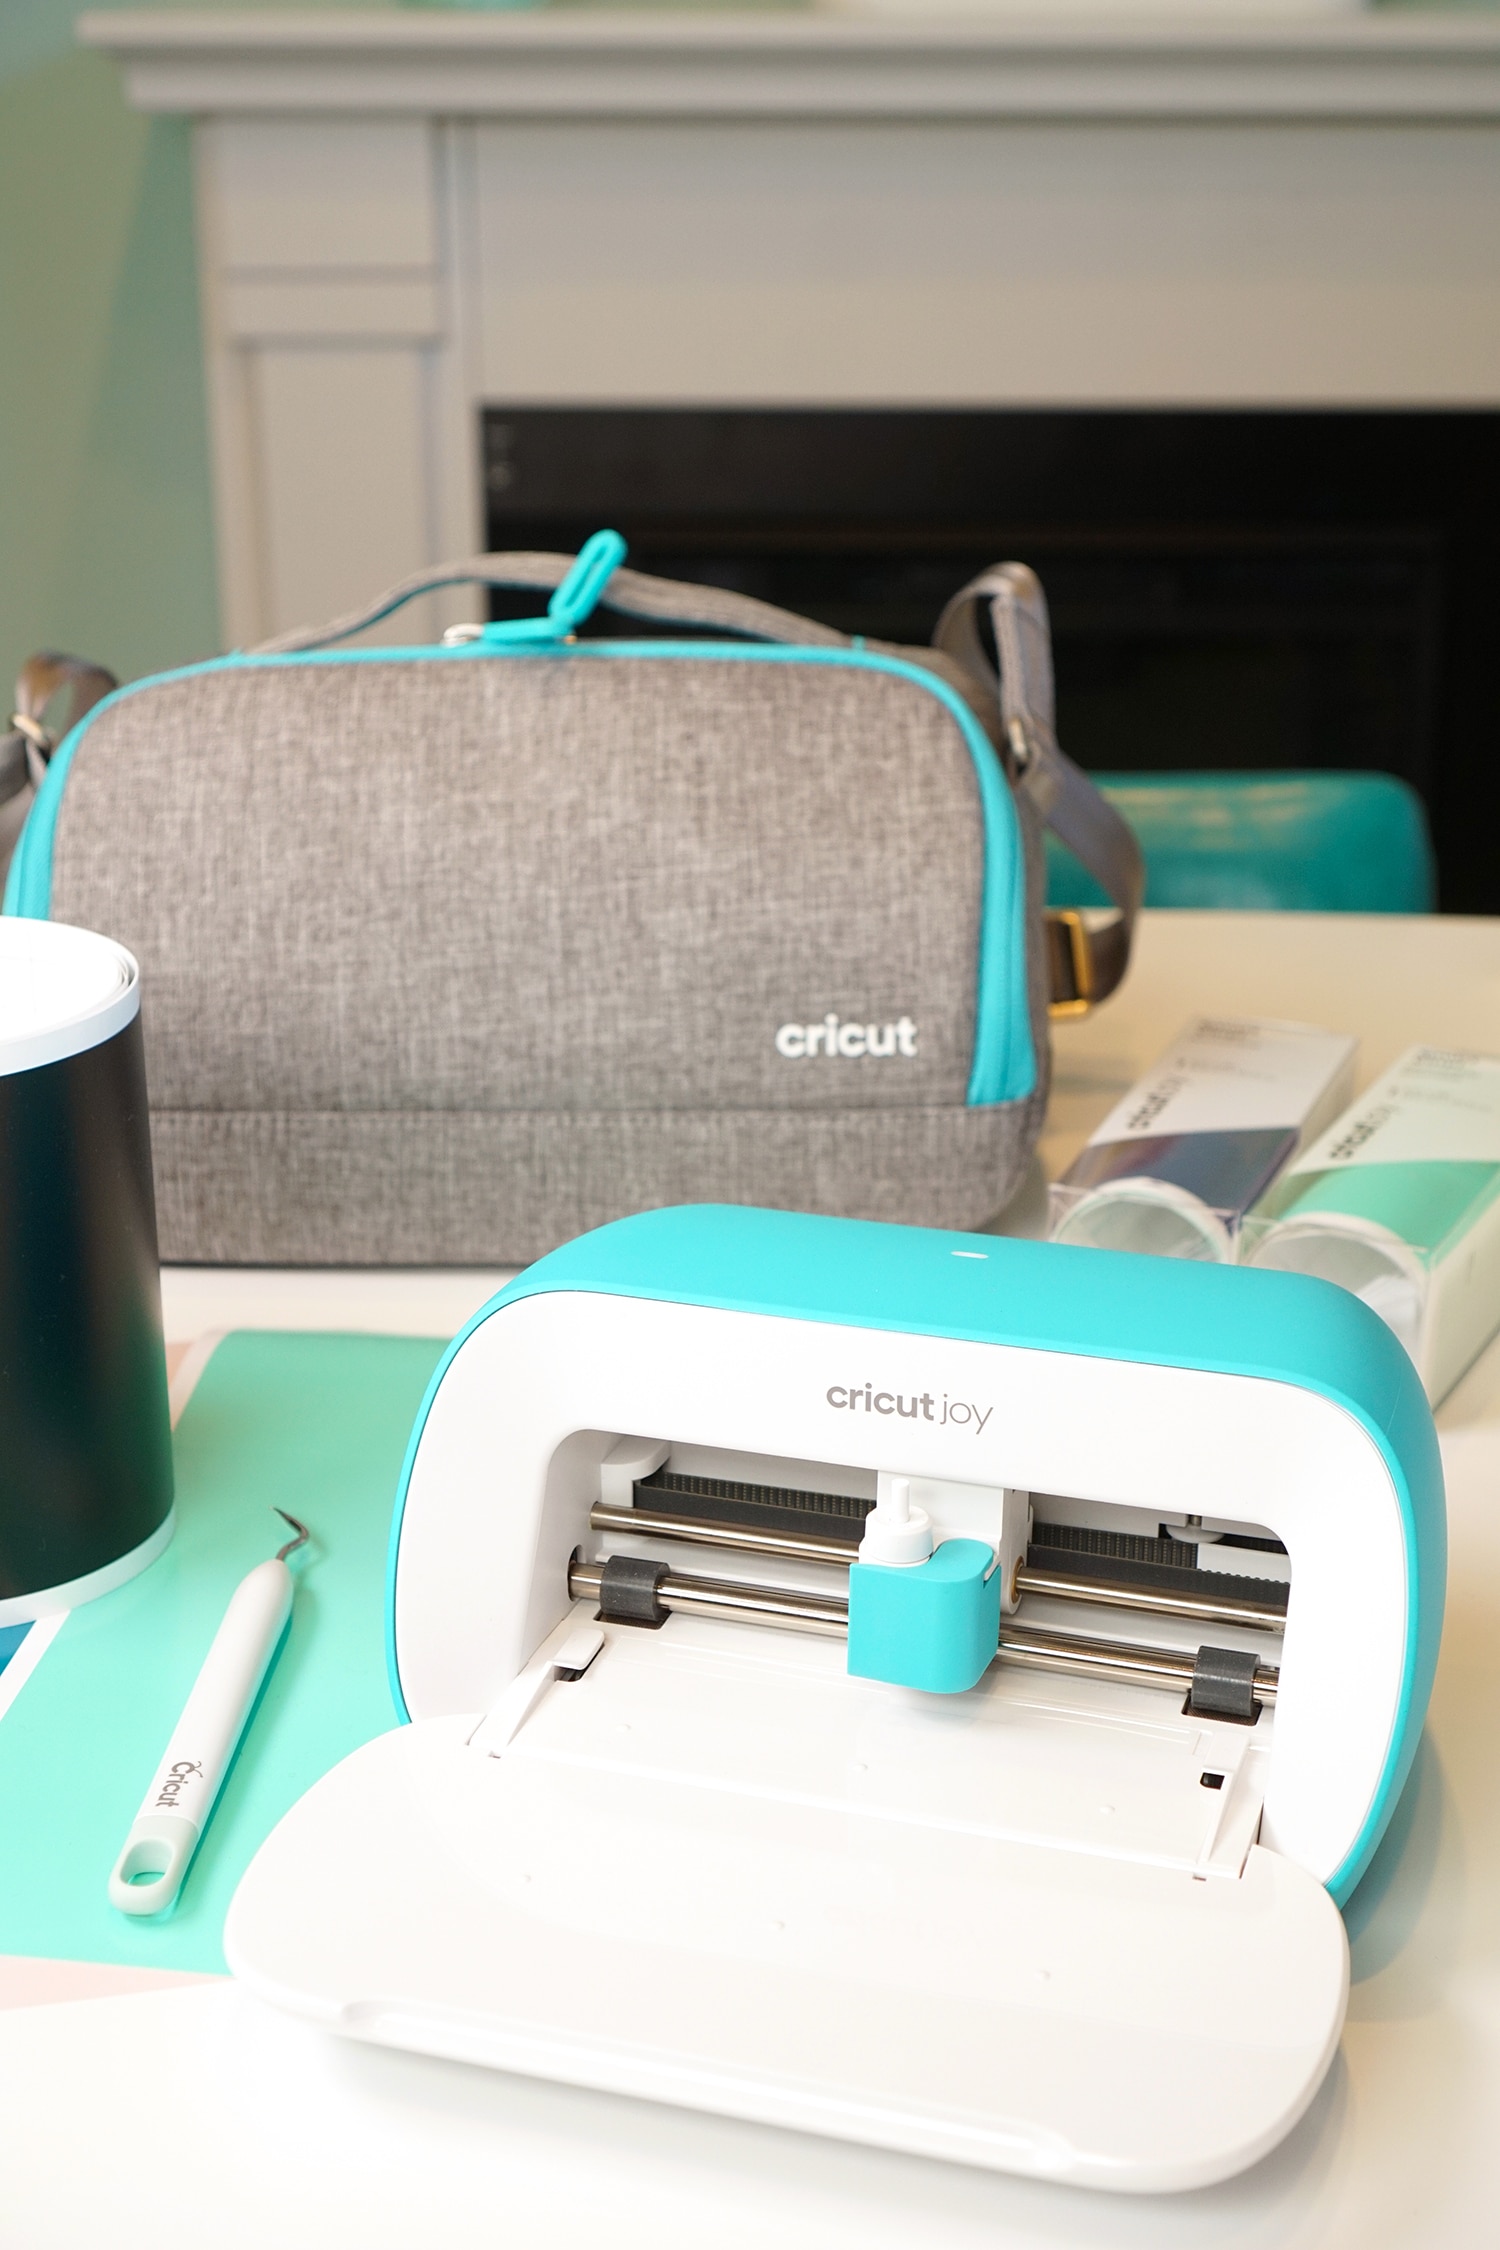 How to Start a Business with Your Cricut - Happiness is Homemade